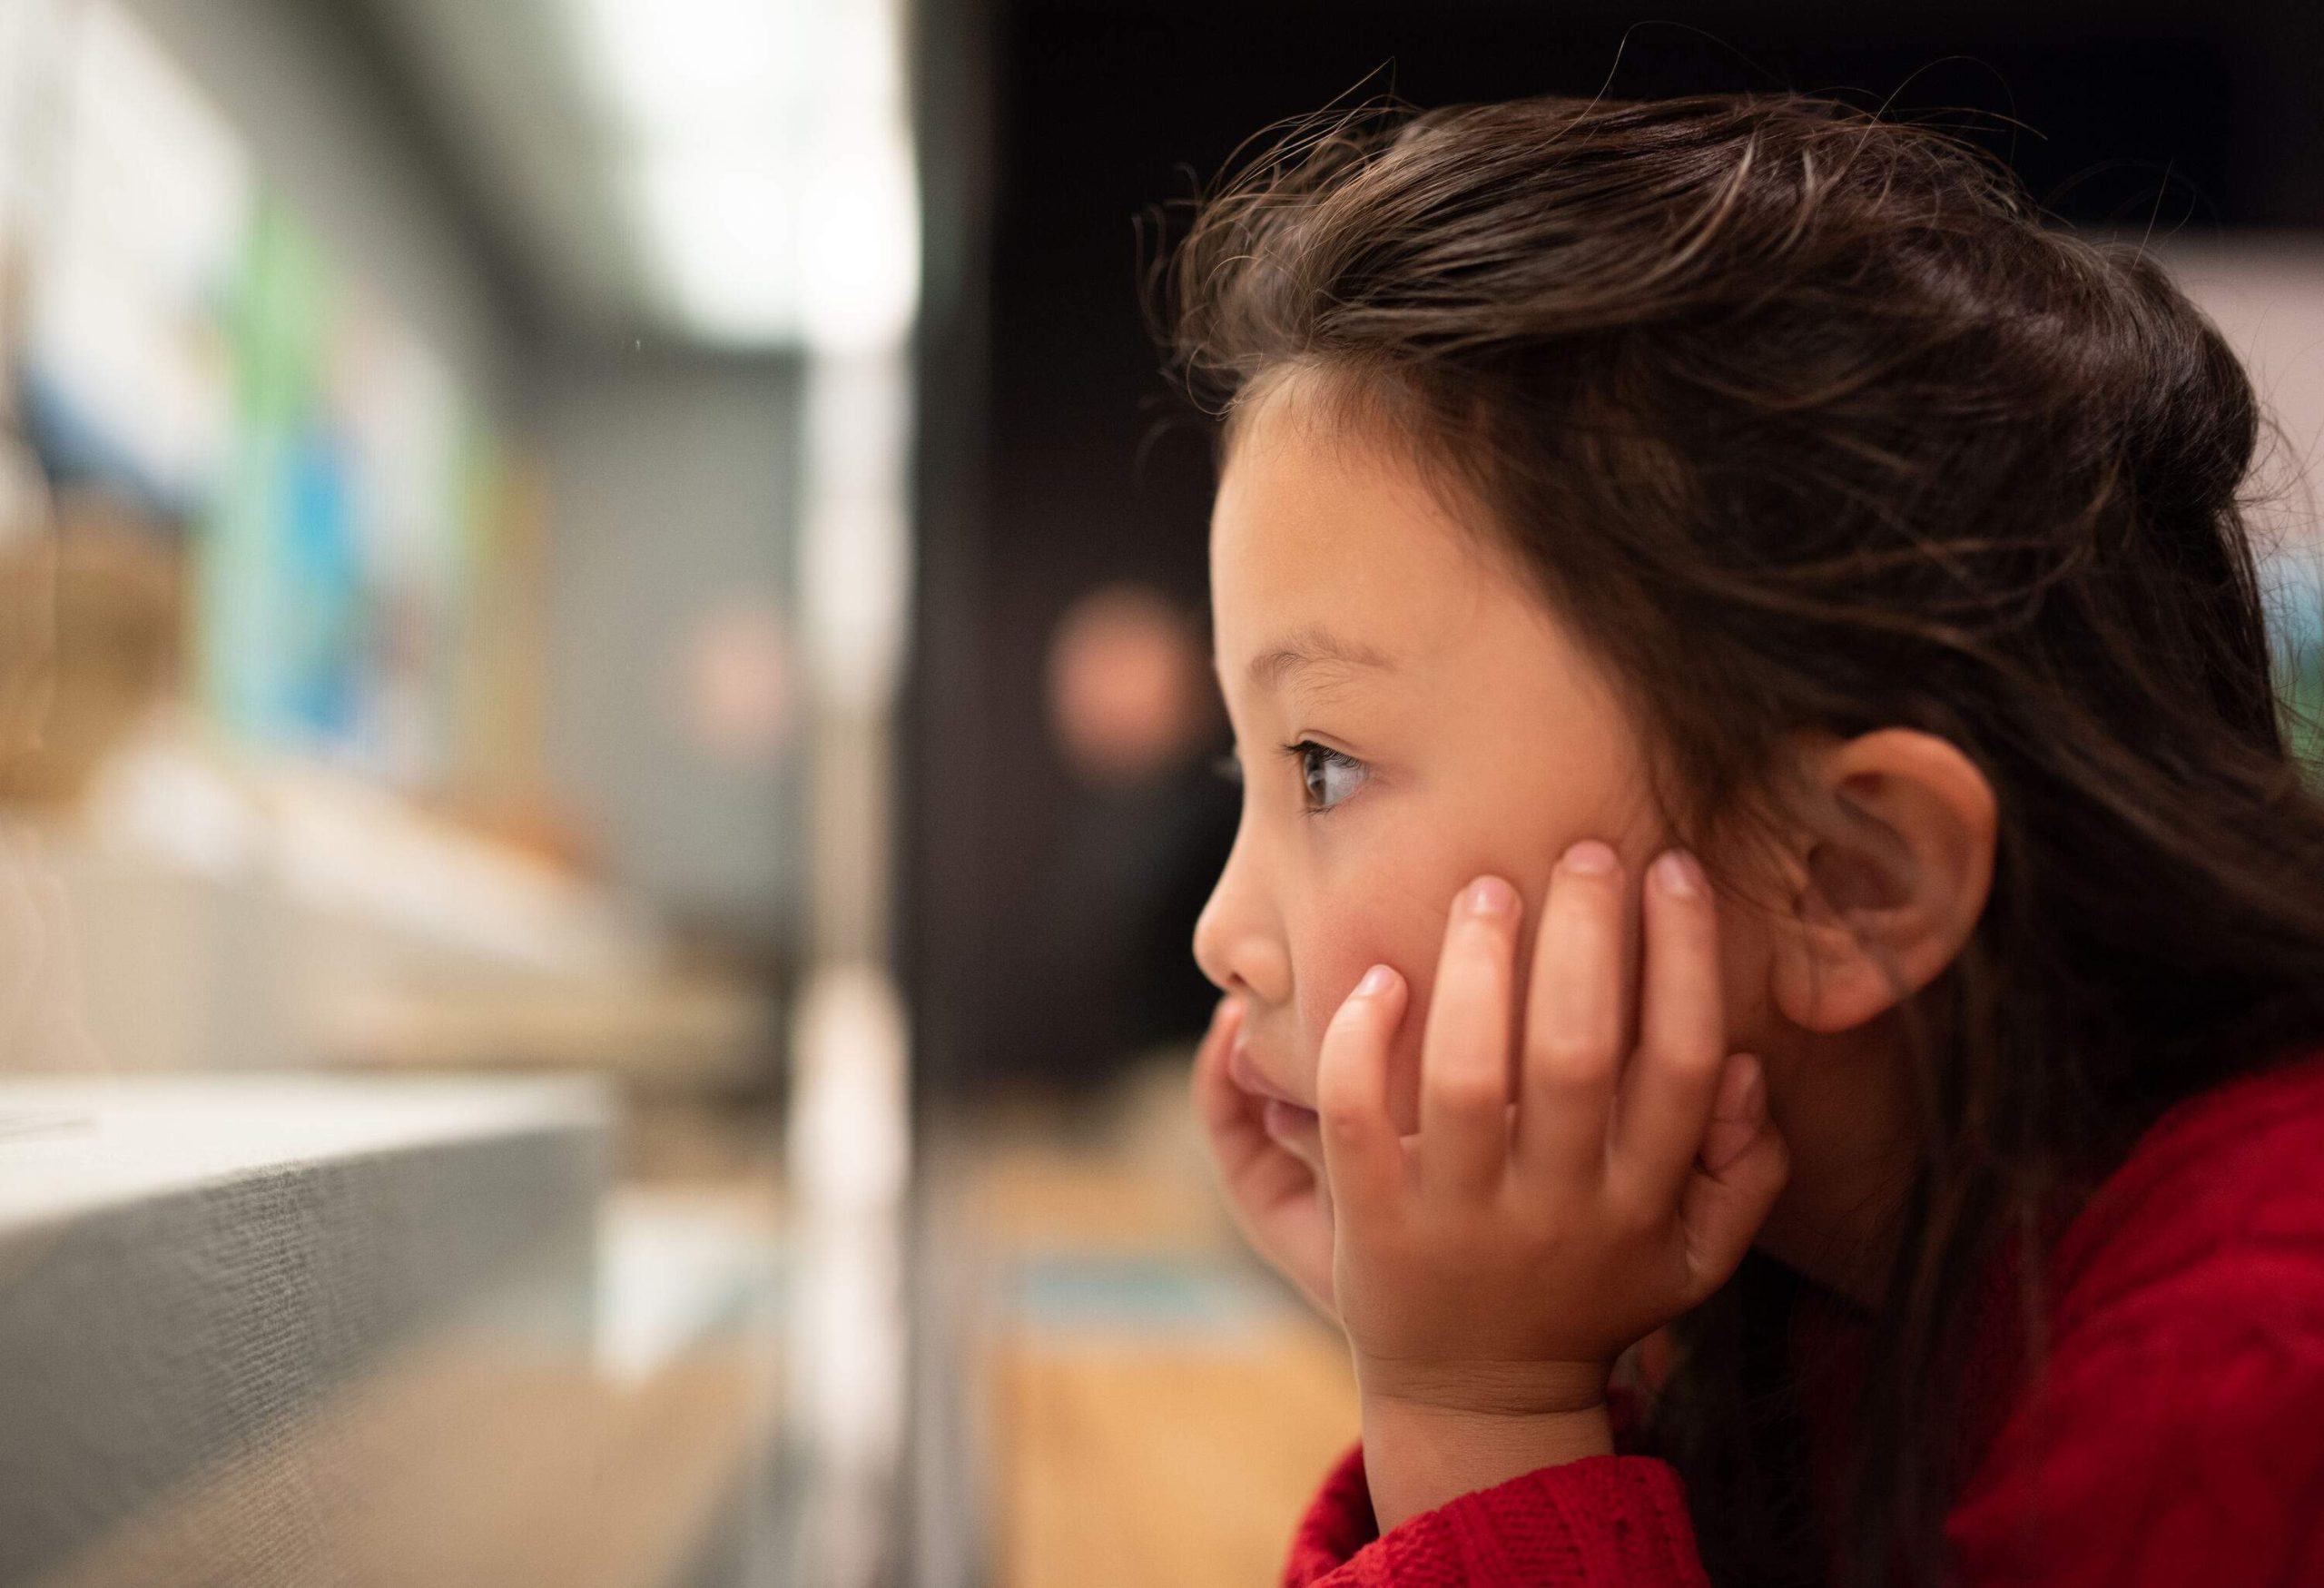 A little girl stares blankly with her head resting on her hands.